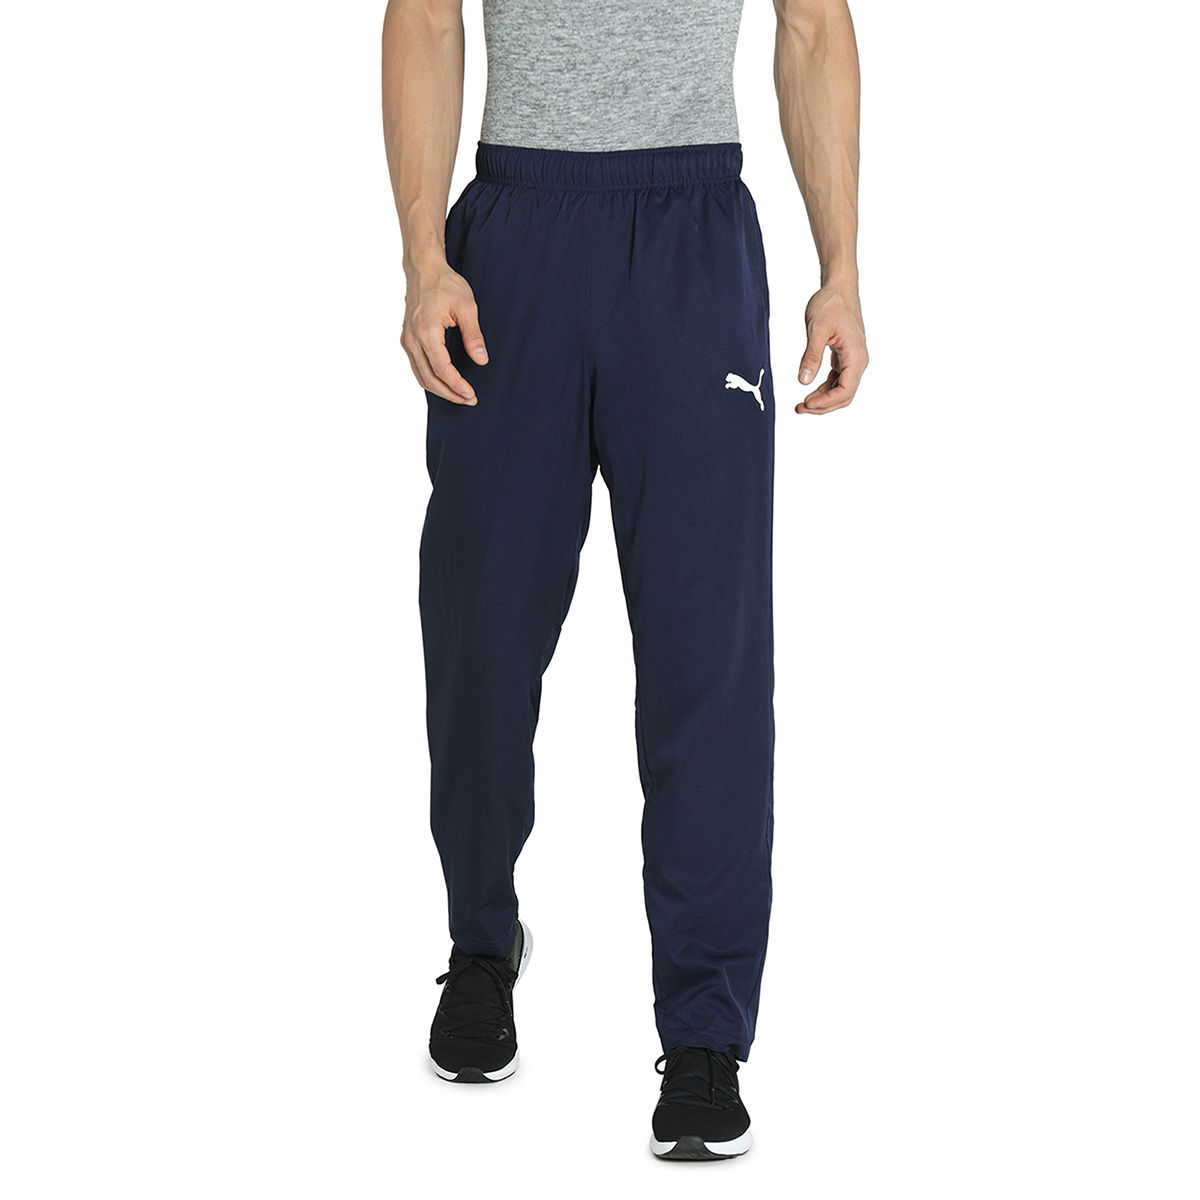 Puma ACTIVE Woven Mens Navy Blue Casual Track Pant (M)